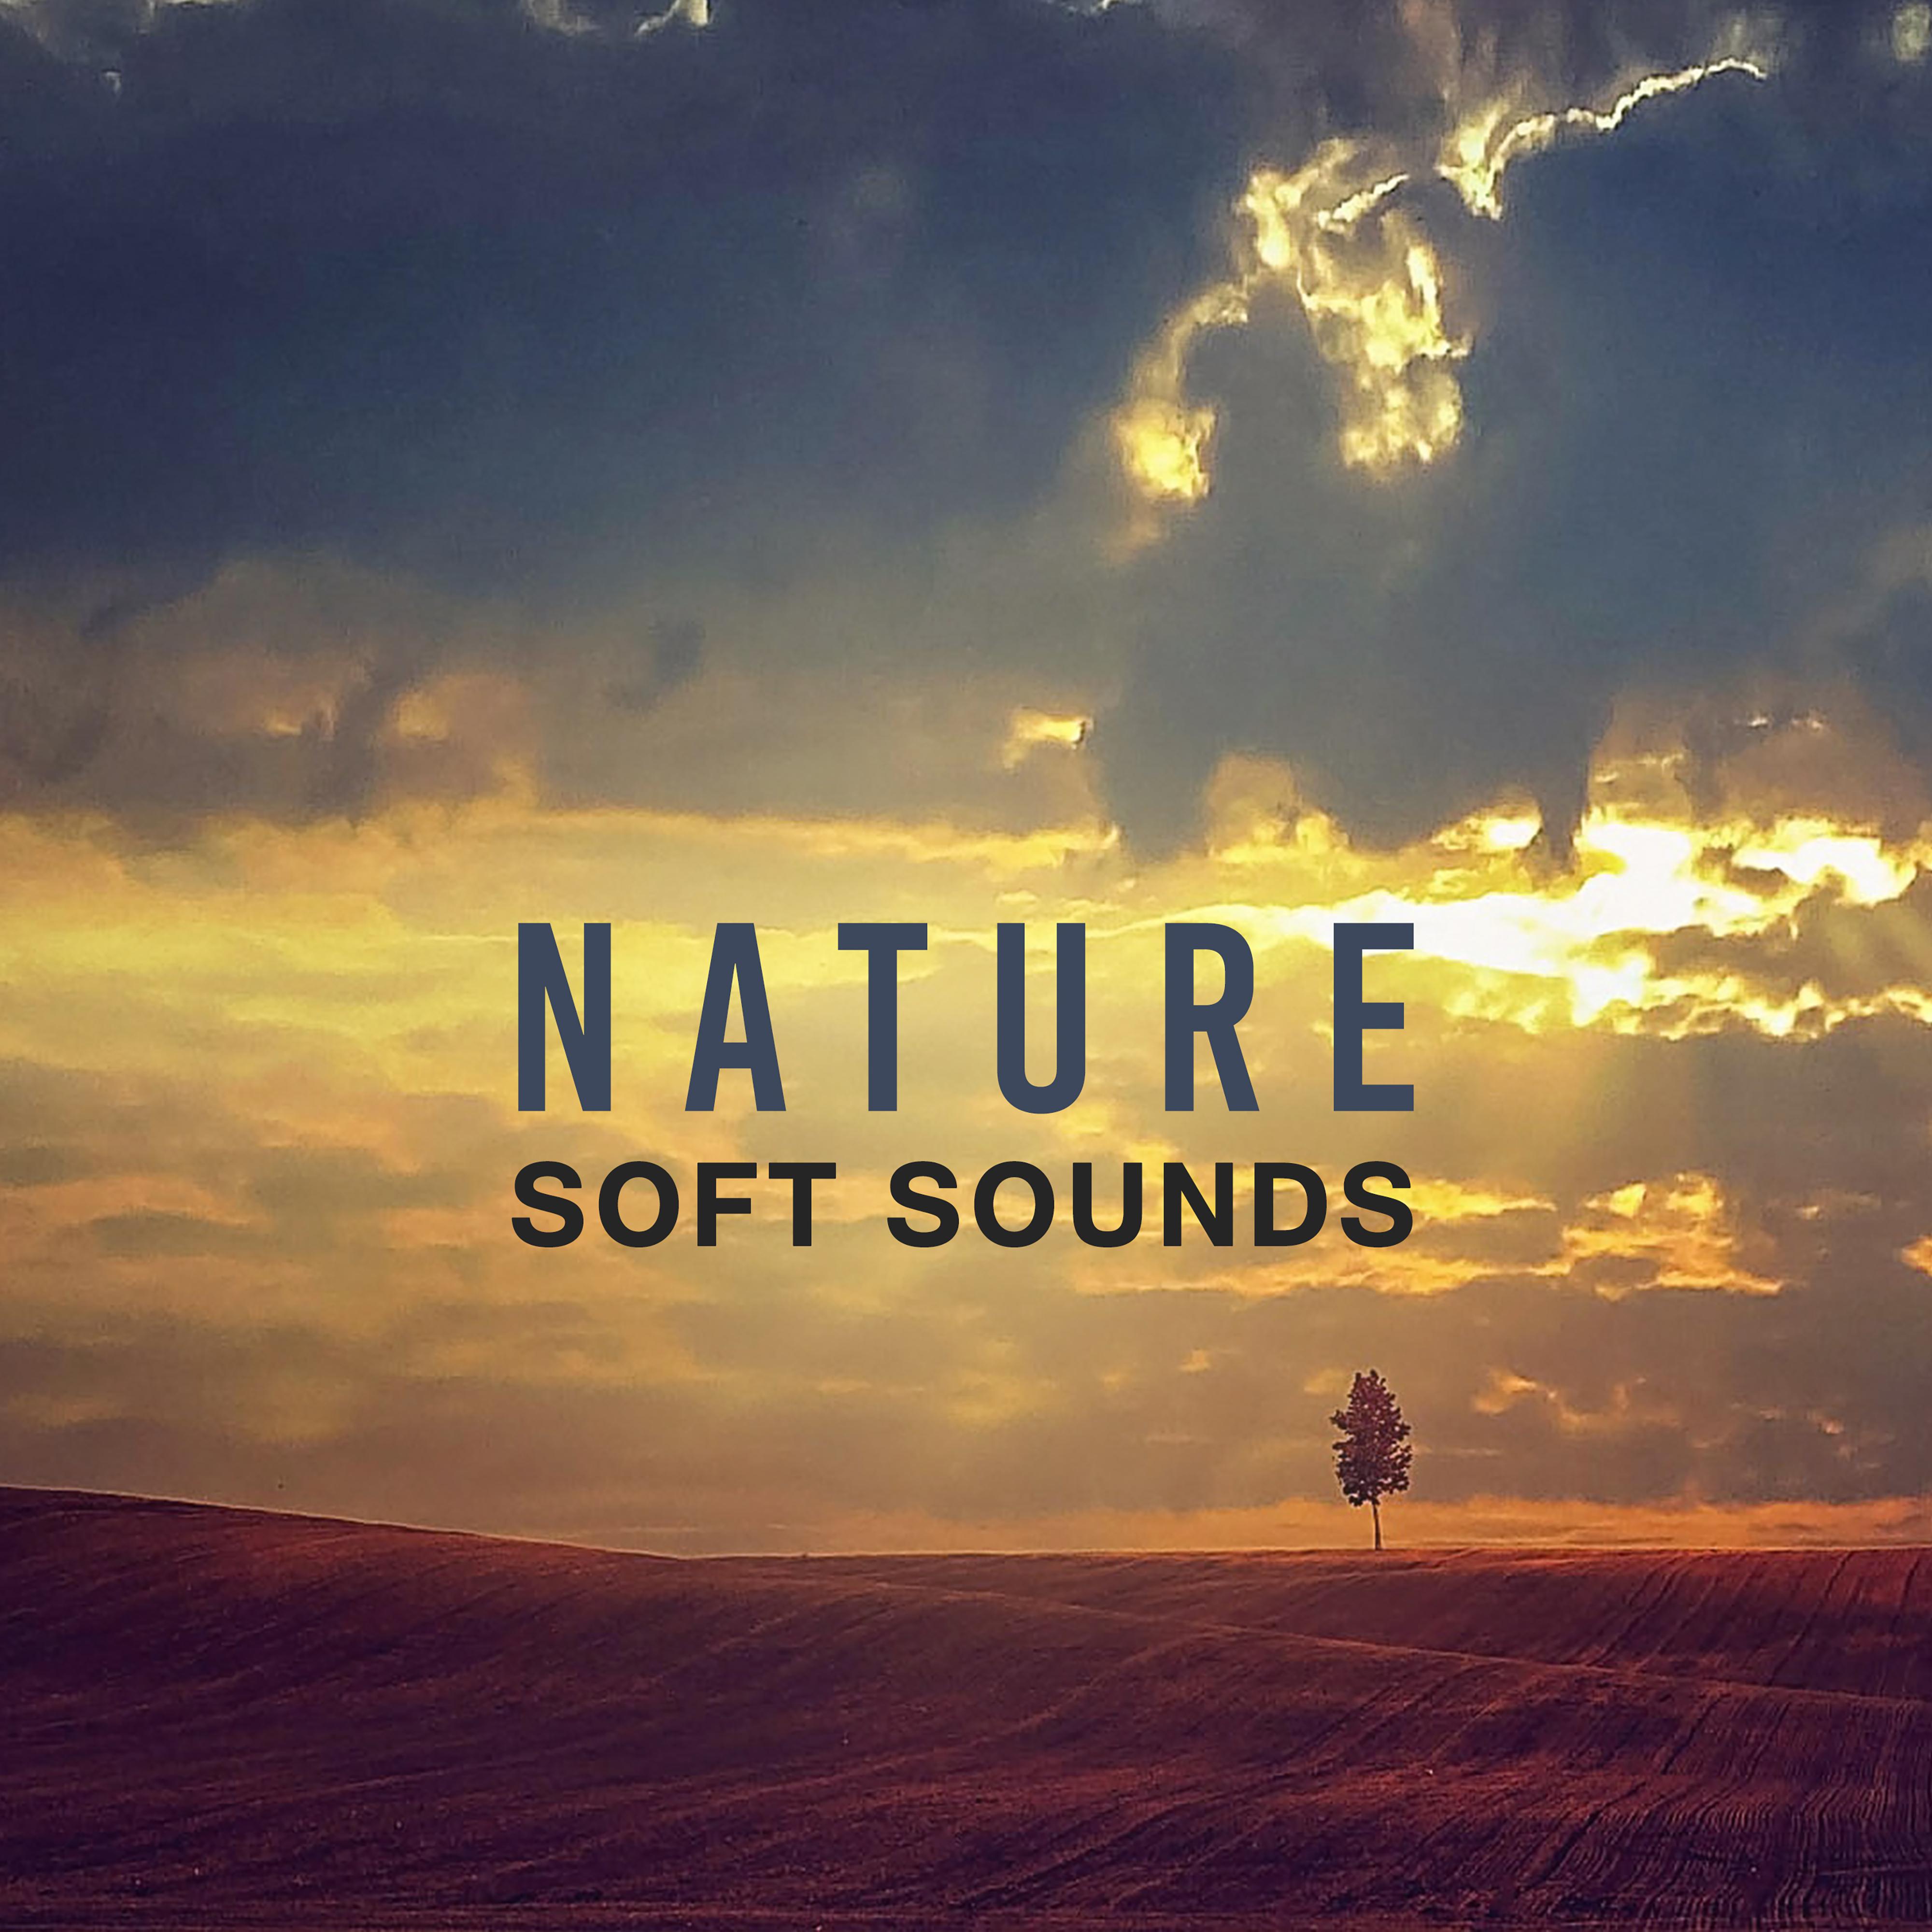 Nature Soft Sounds  Calm Down with Nature Music, New Age Relaxation, Chill Yourself, Inner Balance